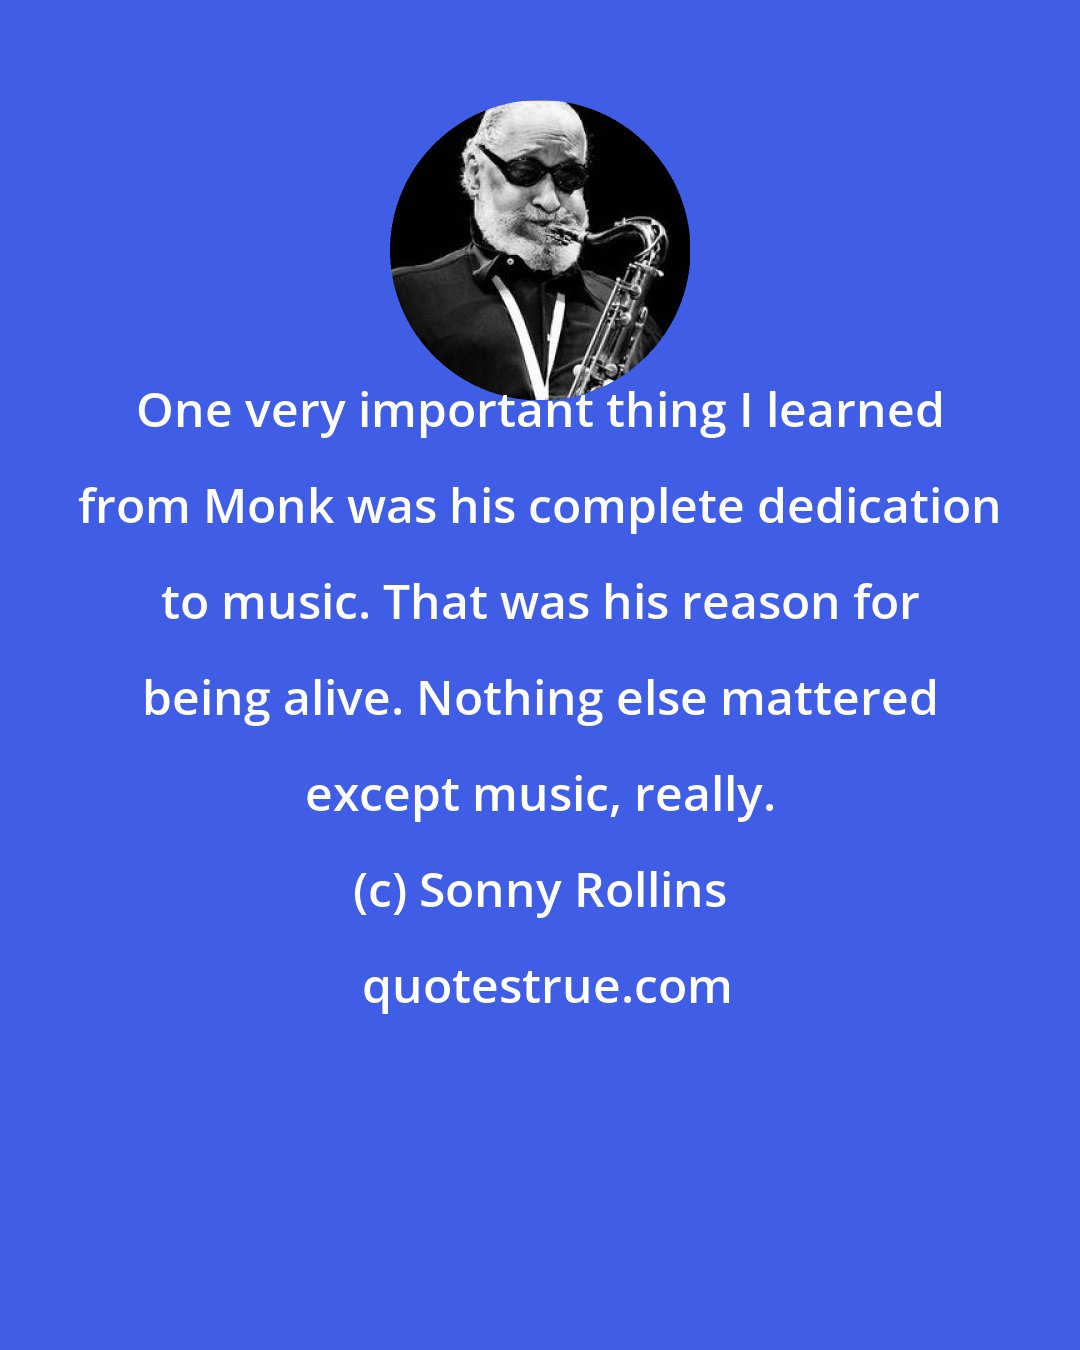 Sonny Rollins: One very important thing I learned from Monk was his complete dedication to music. That was his reason for being alive. Nothing else mattered except music, really.